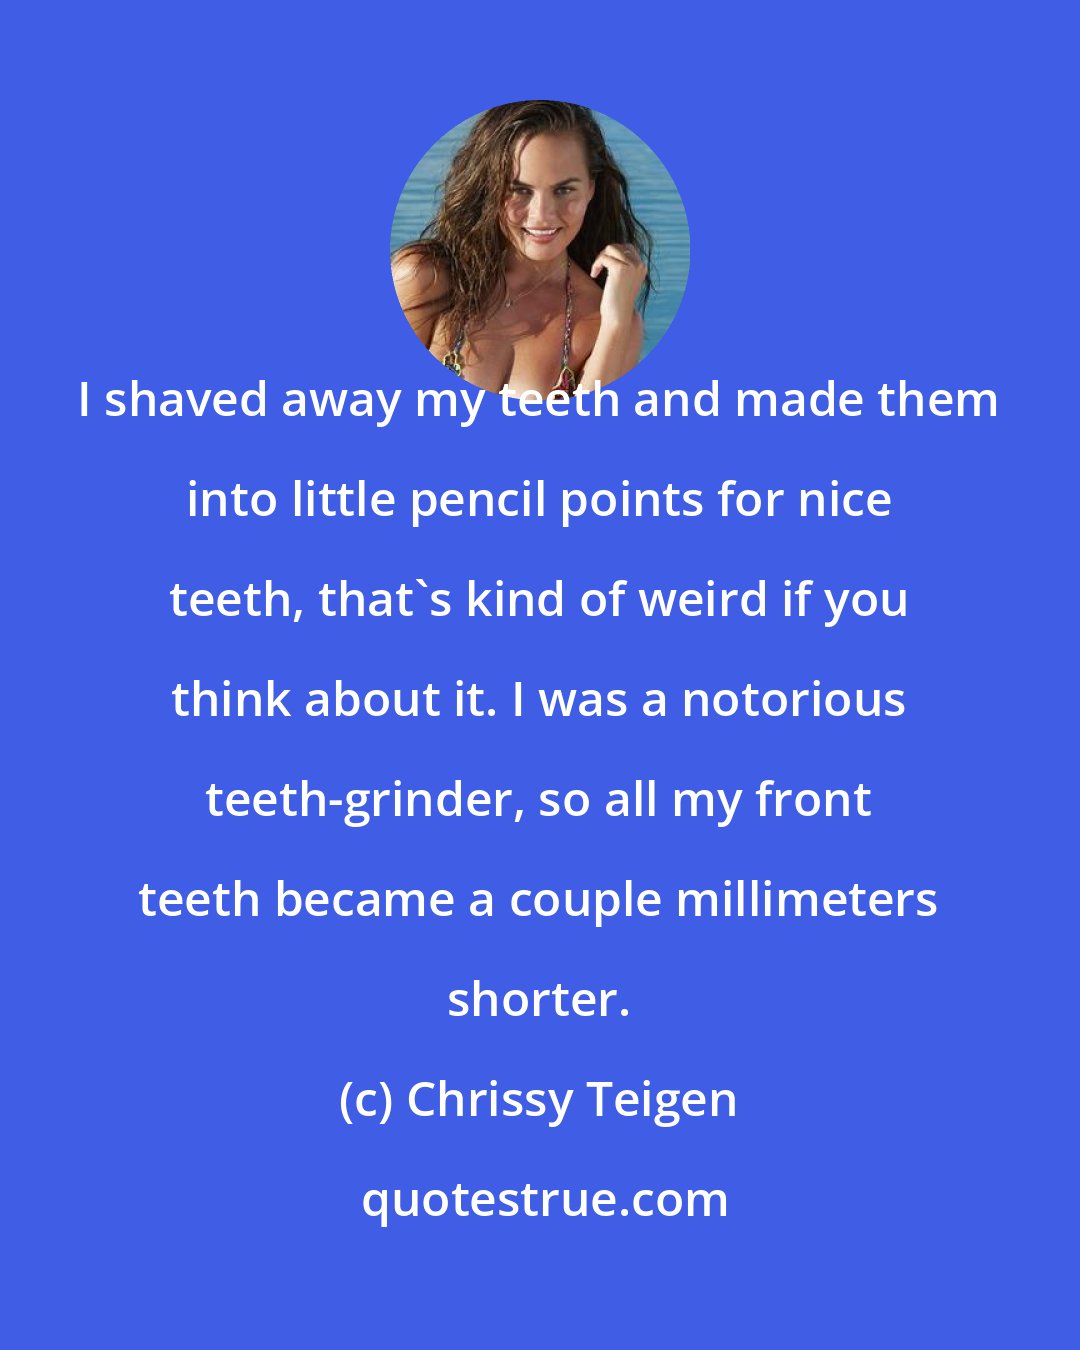 Chrissy Teigen: I shaved away my teeth and made them into little pencil points for nice teeth, that's kind of weird if you think about it. I was a notorious teeth-grinder, so all my front teeth became a couple millimeters shorter.